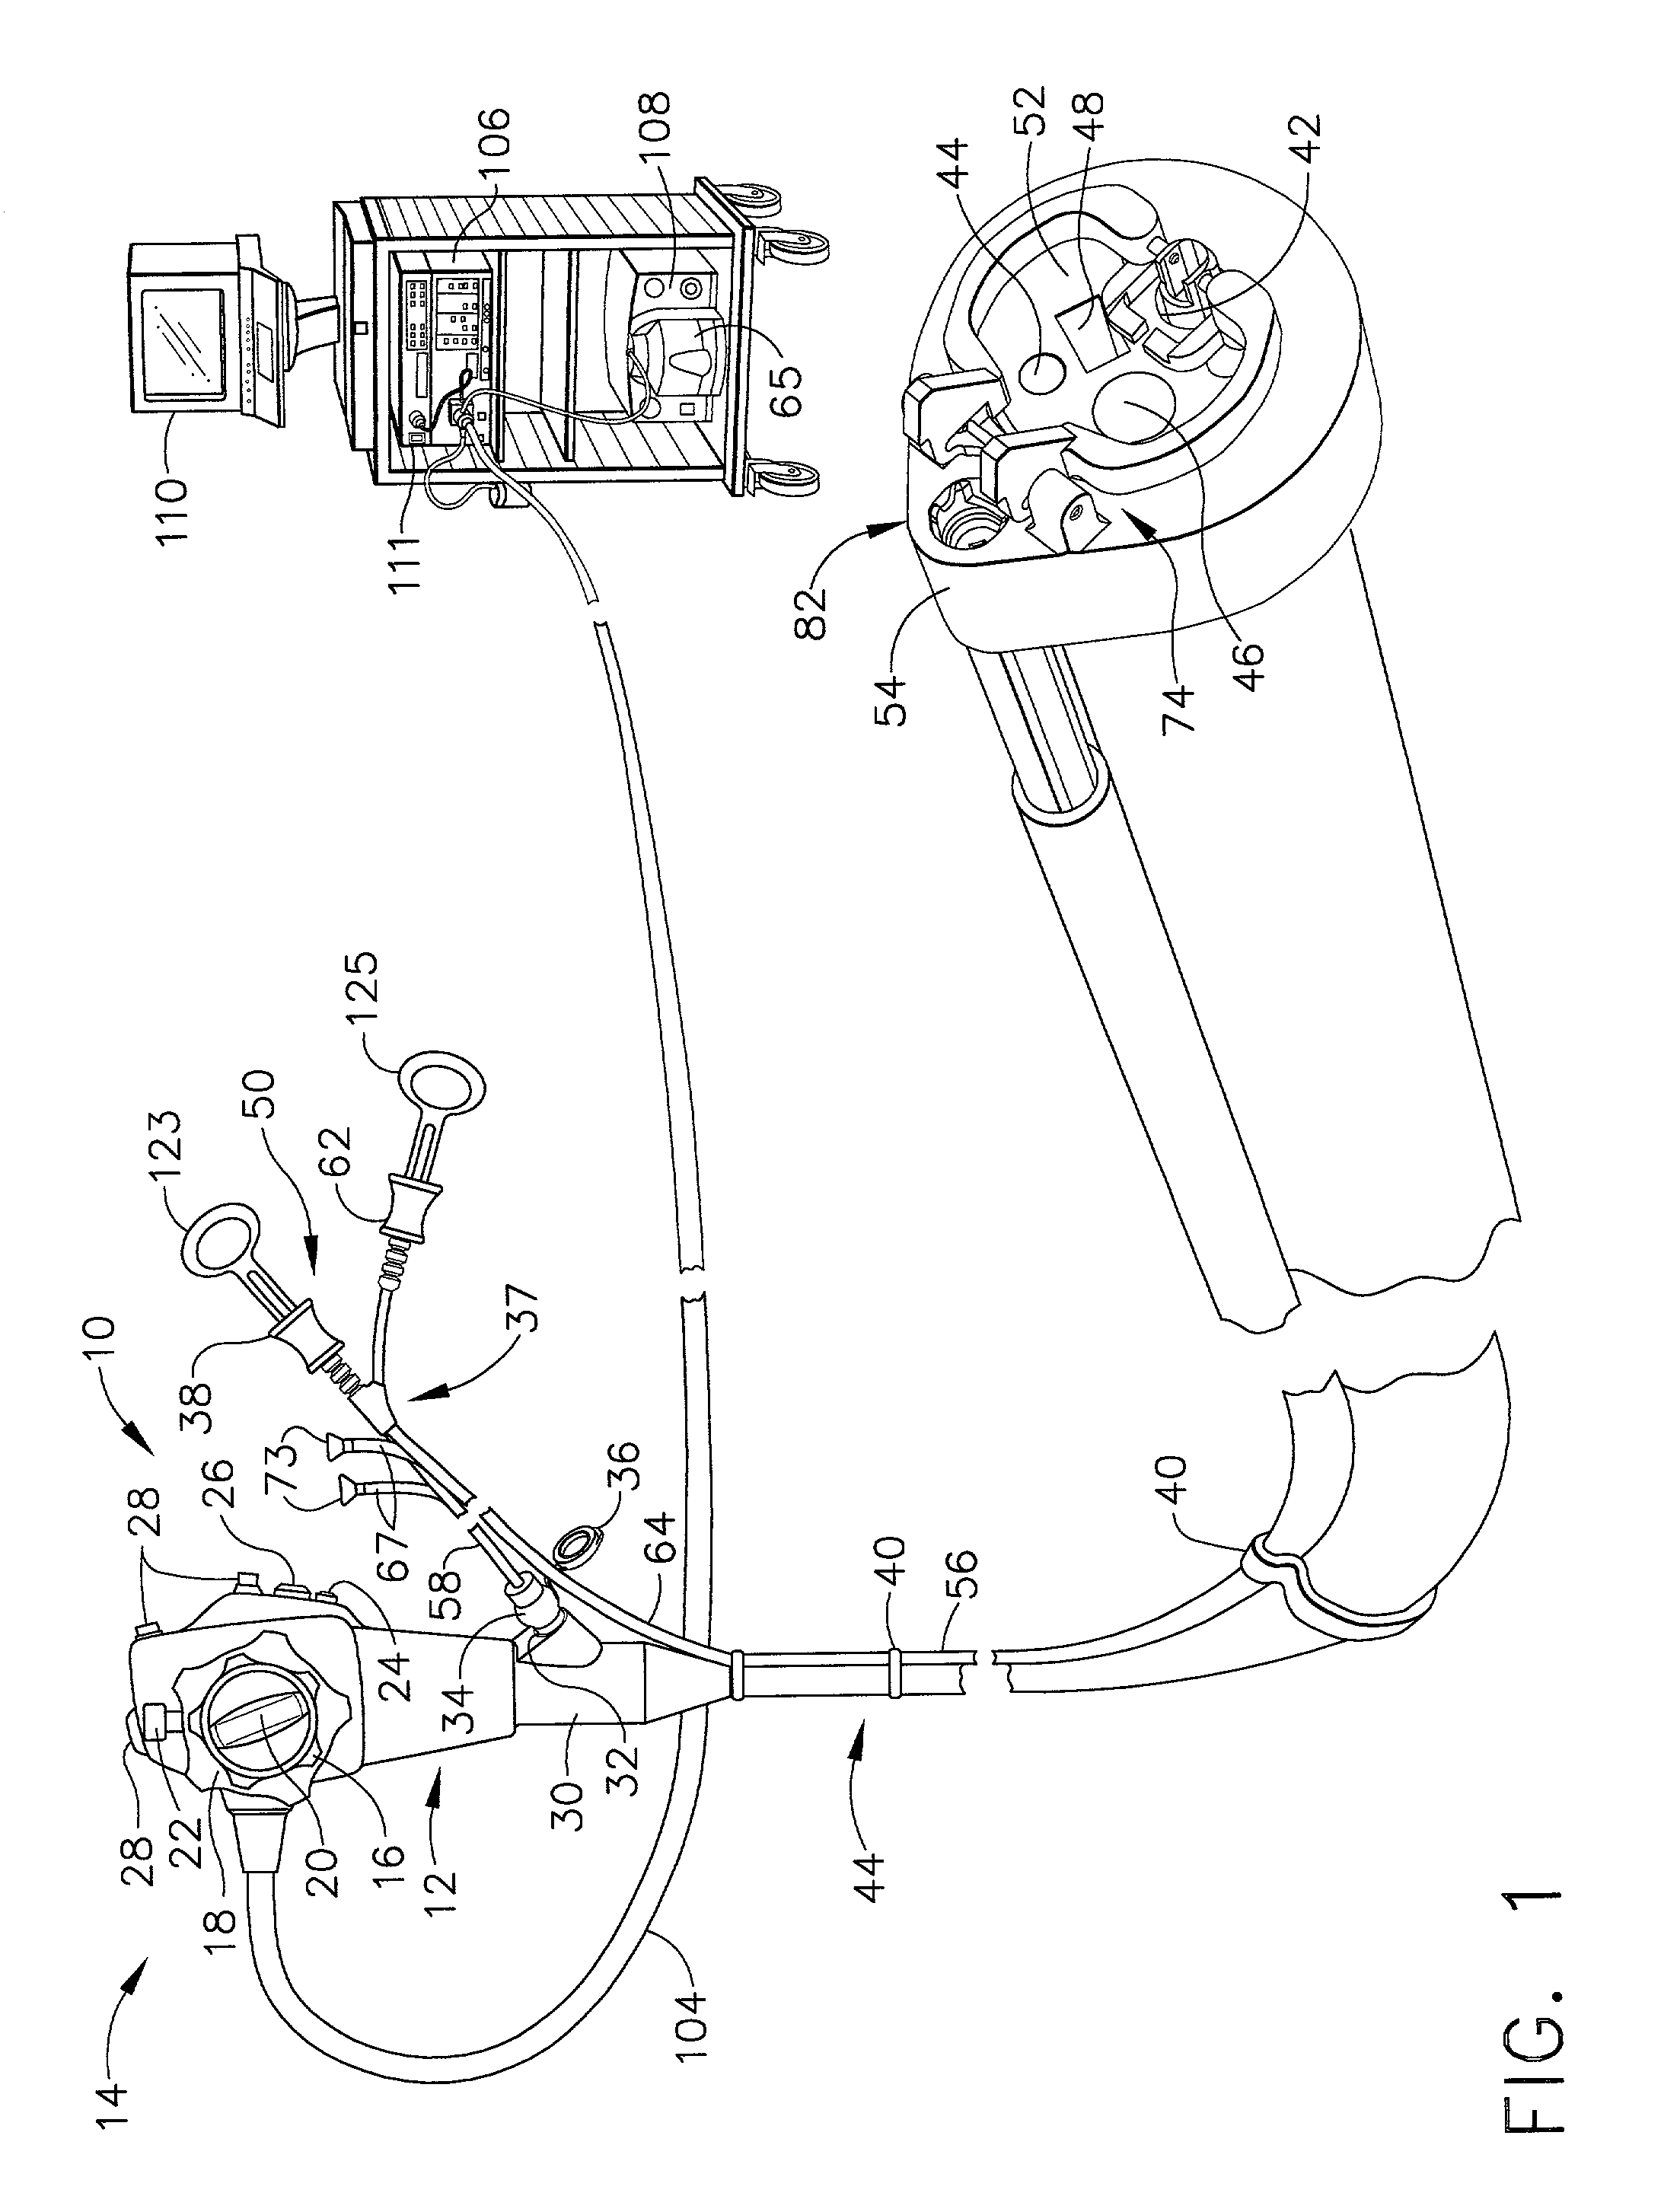 Apparatus for guiding an instrument used with an endoscope